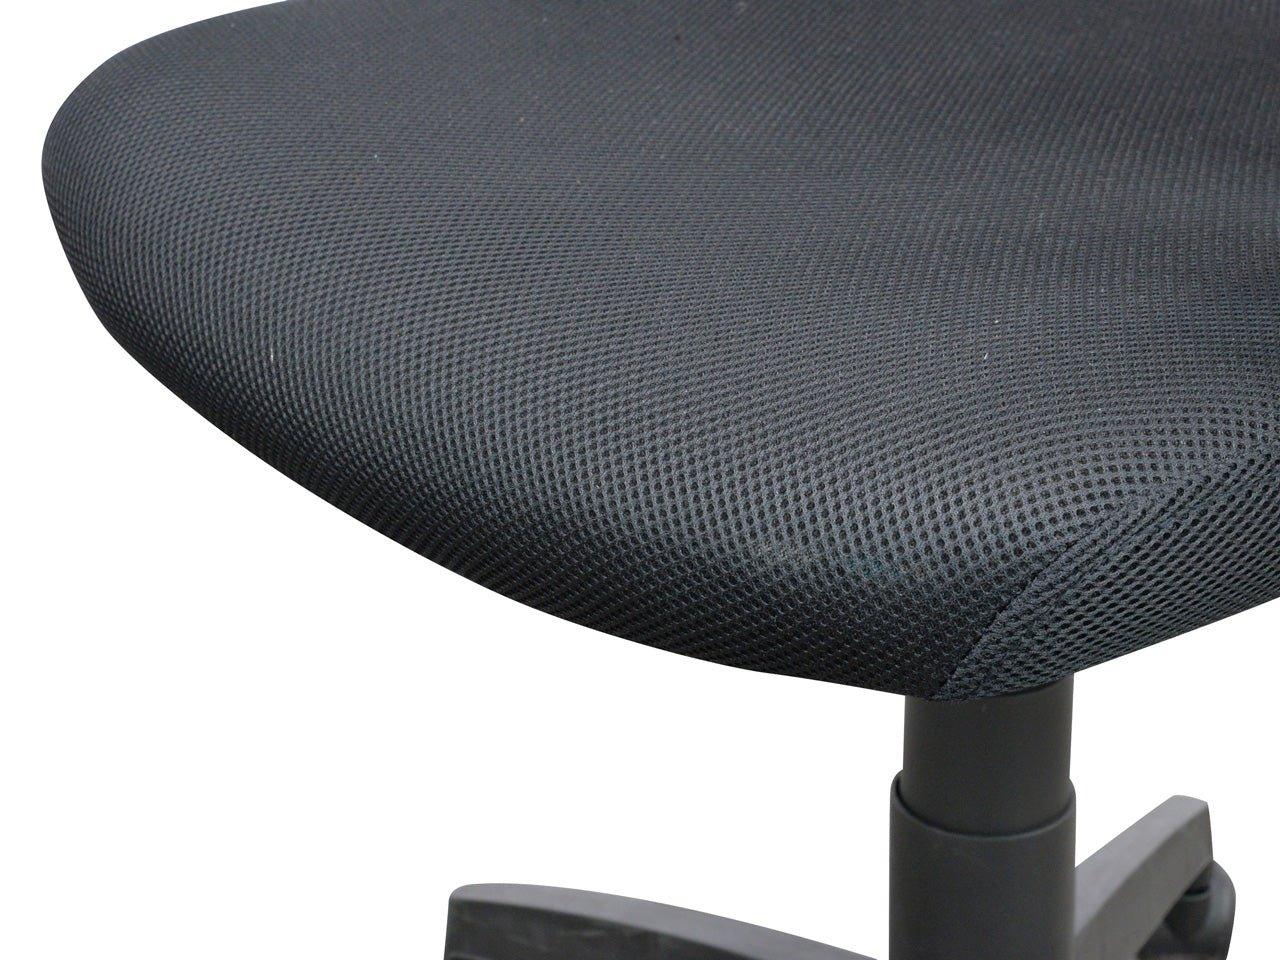 Heston Office Chair - Office/Gaming ChairsOC483-LF 8